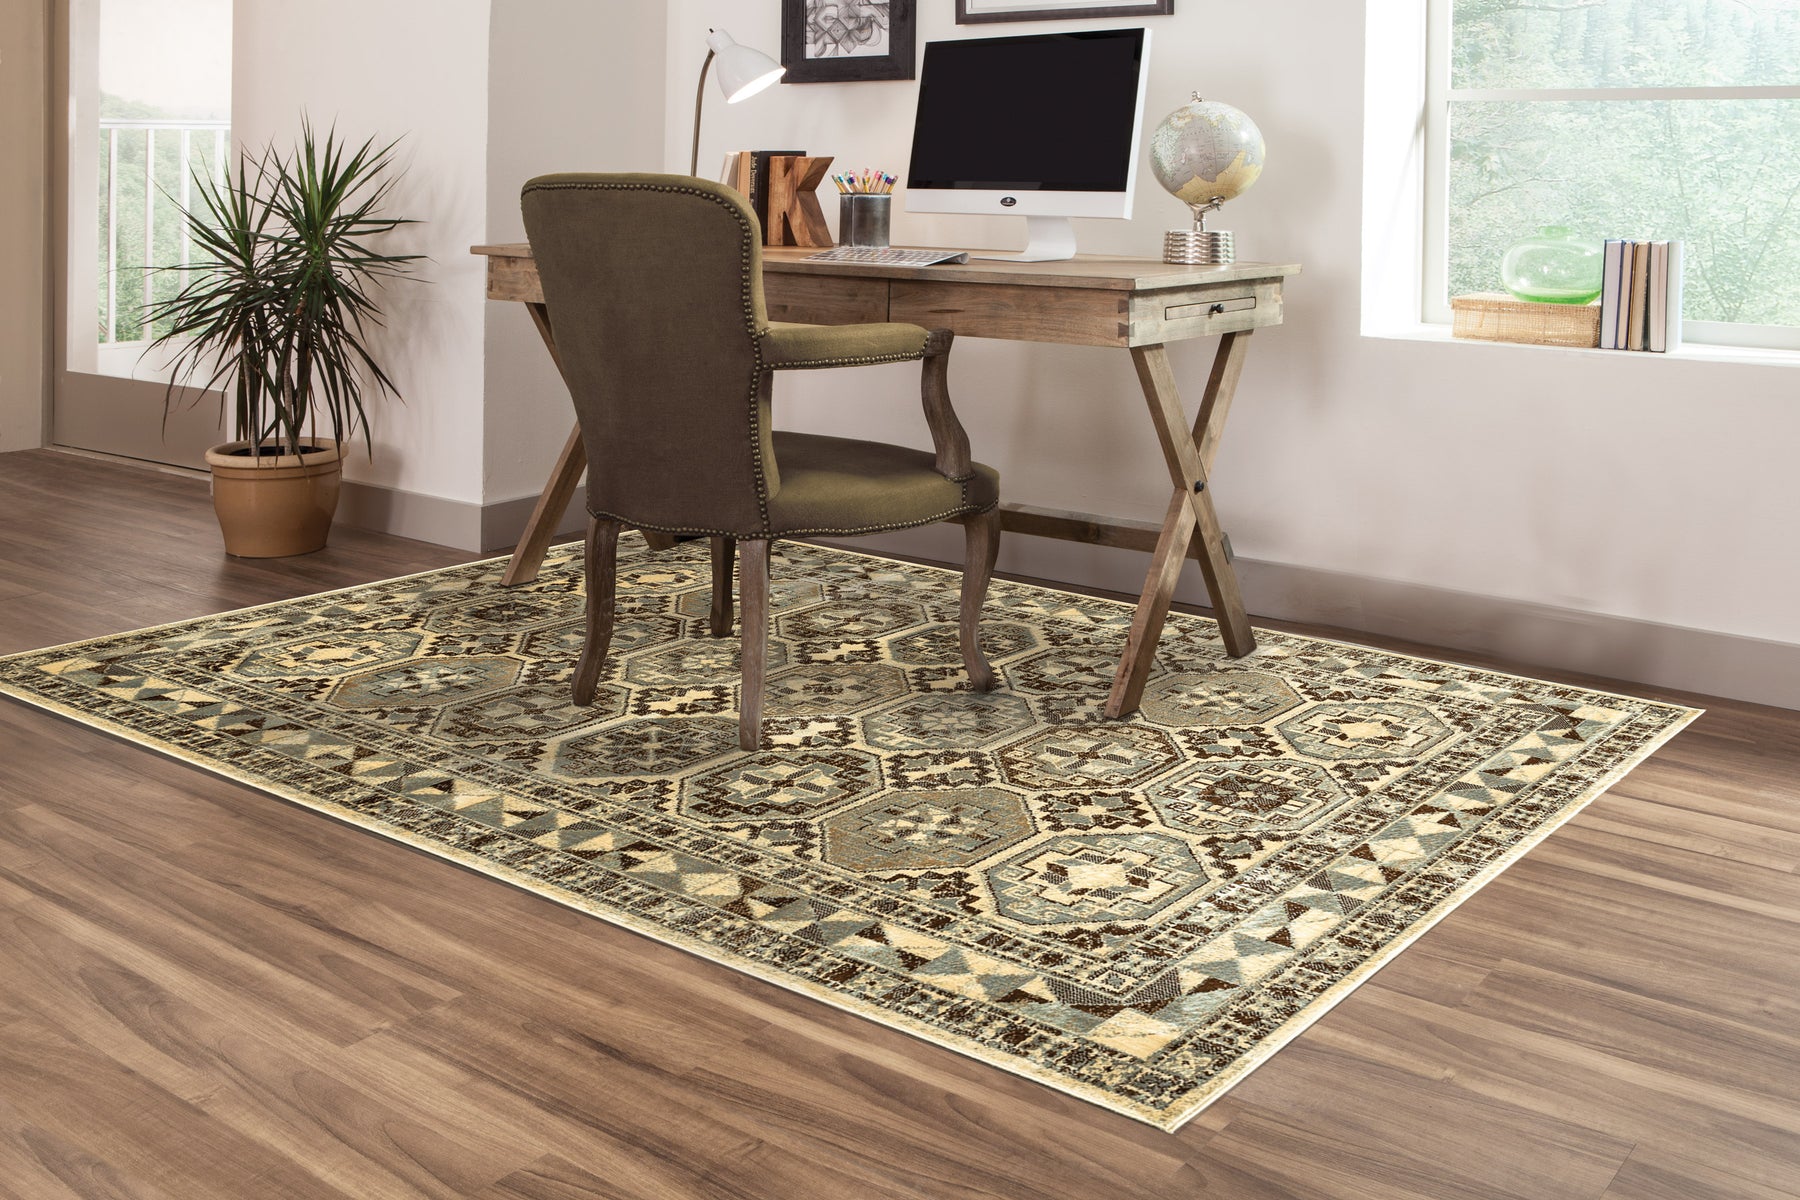 Upgrade Your Home Office With Rugs